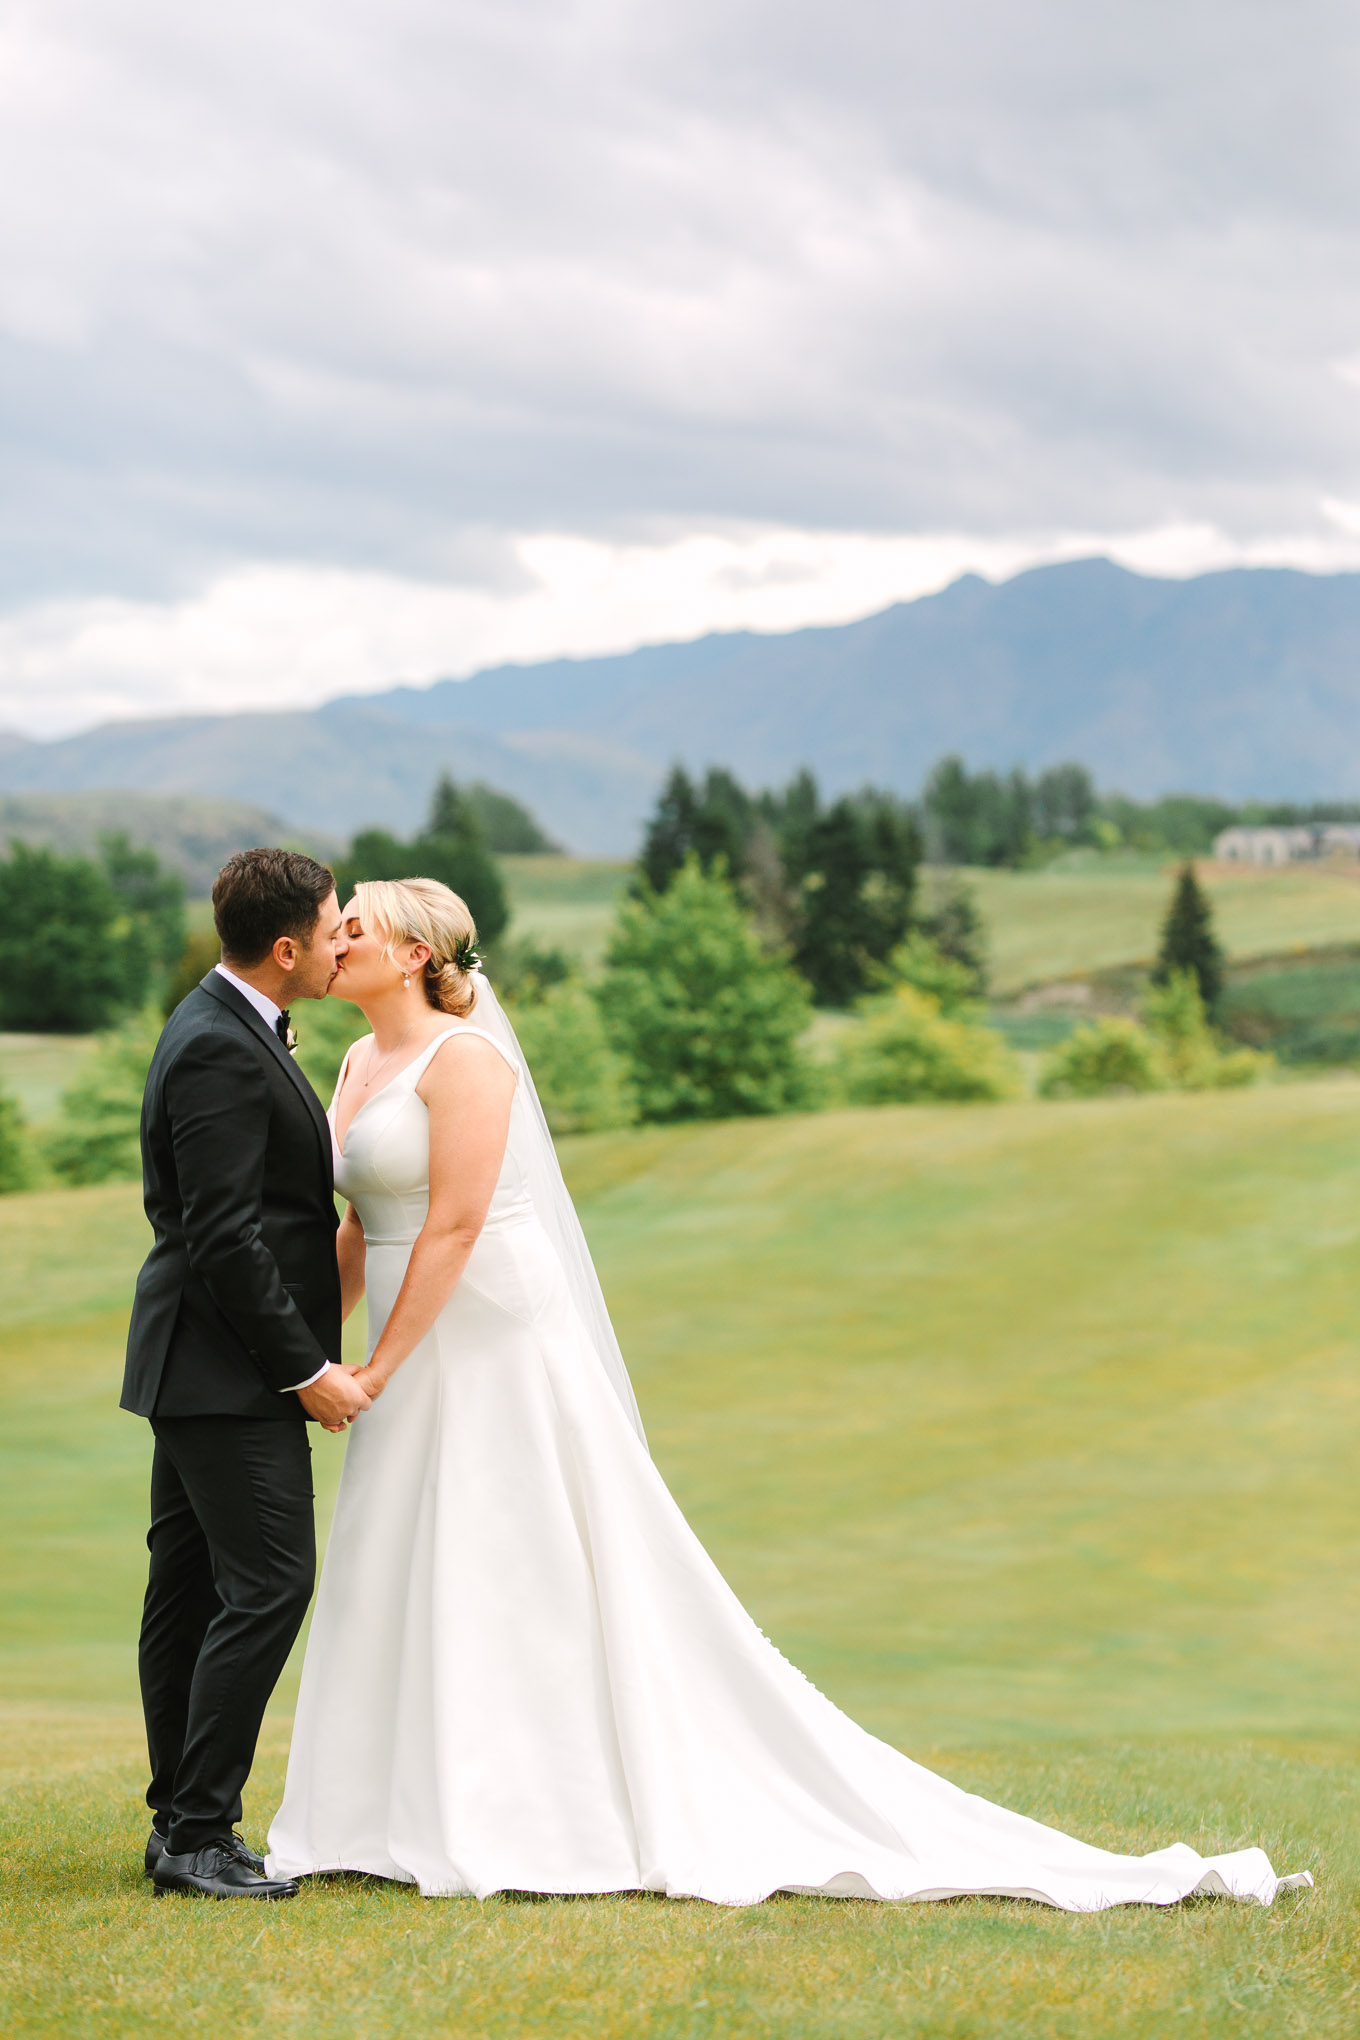 Bride and groom kissing at first look on hillside. Millbrook Resort Queenstown New Zealand wedding by Mary Costa Photography | www.marycostaweddings.com